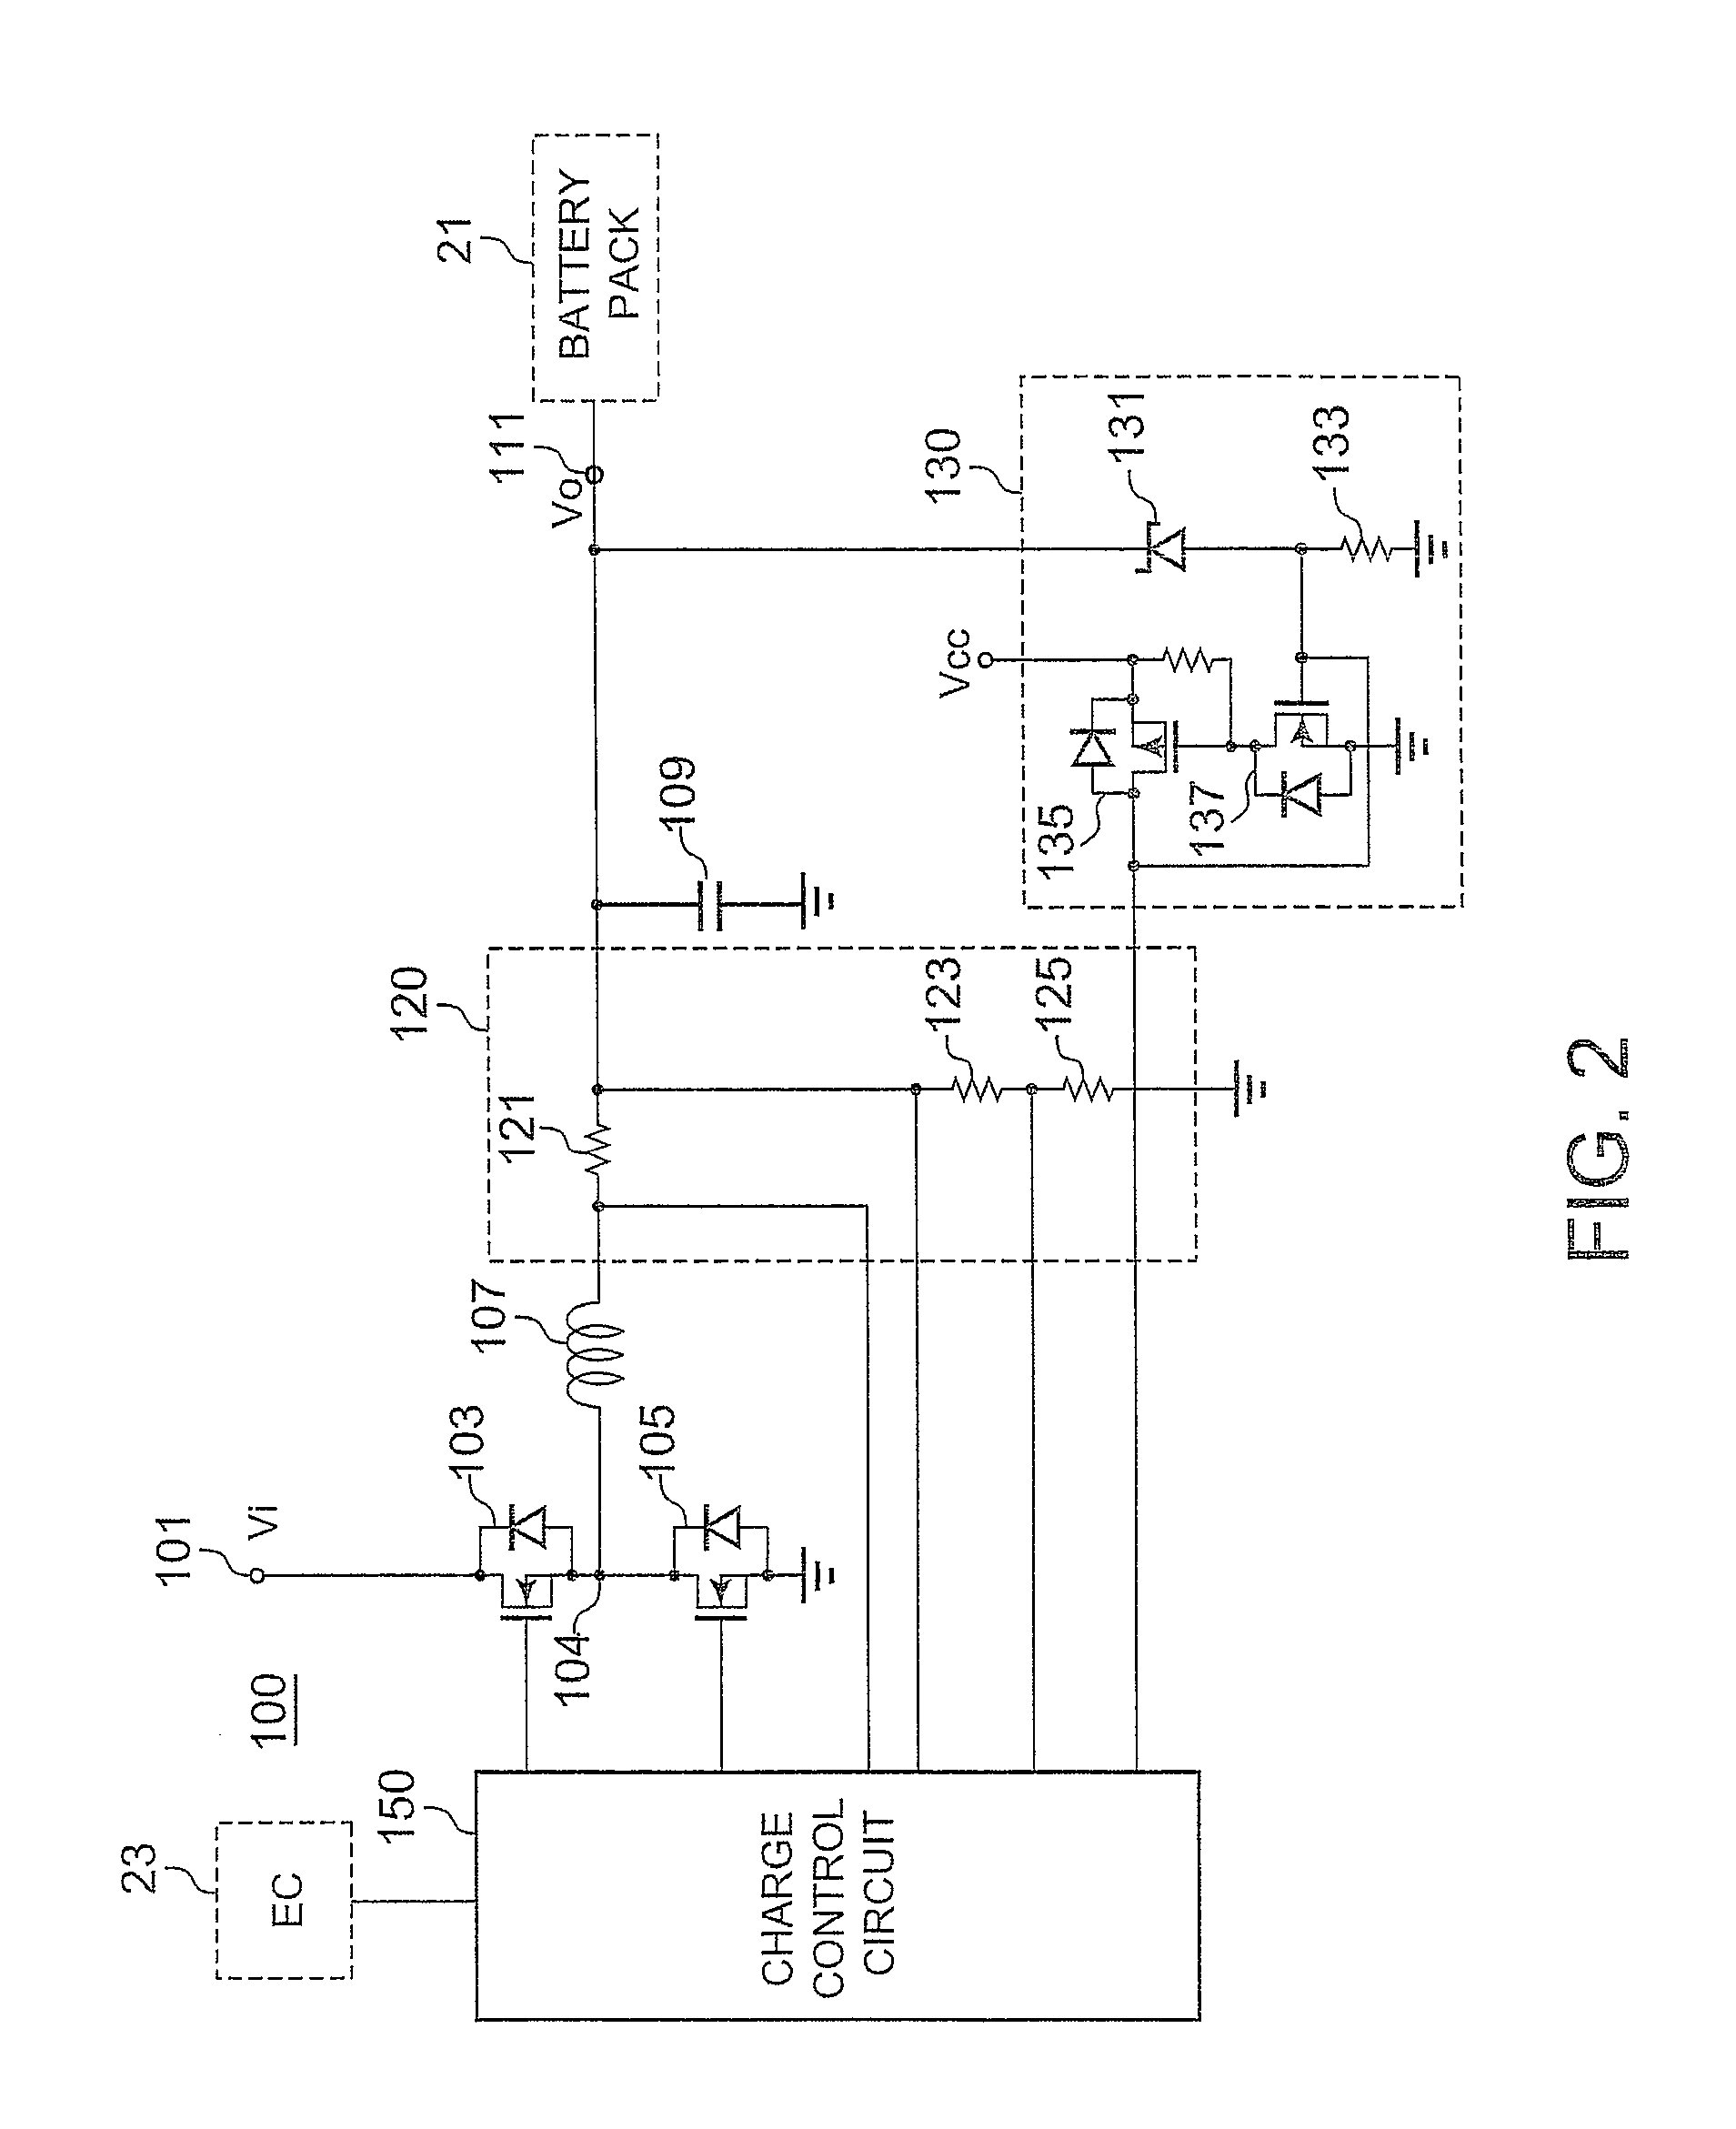 Method and Apparatus for Charging Batteries